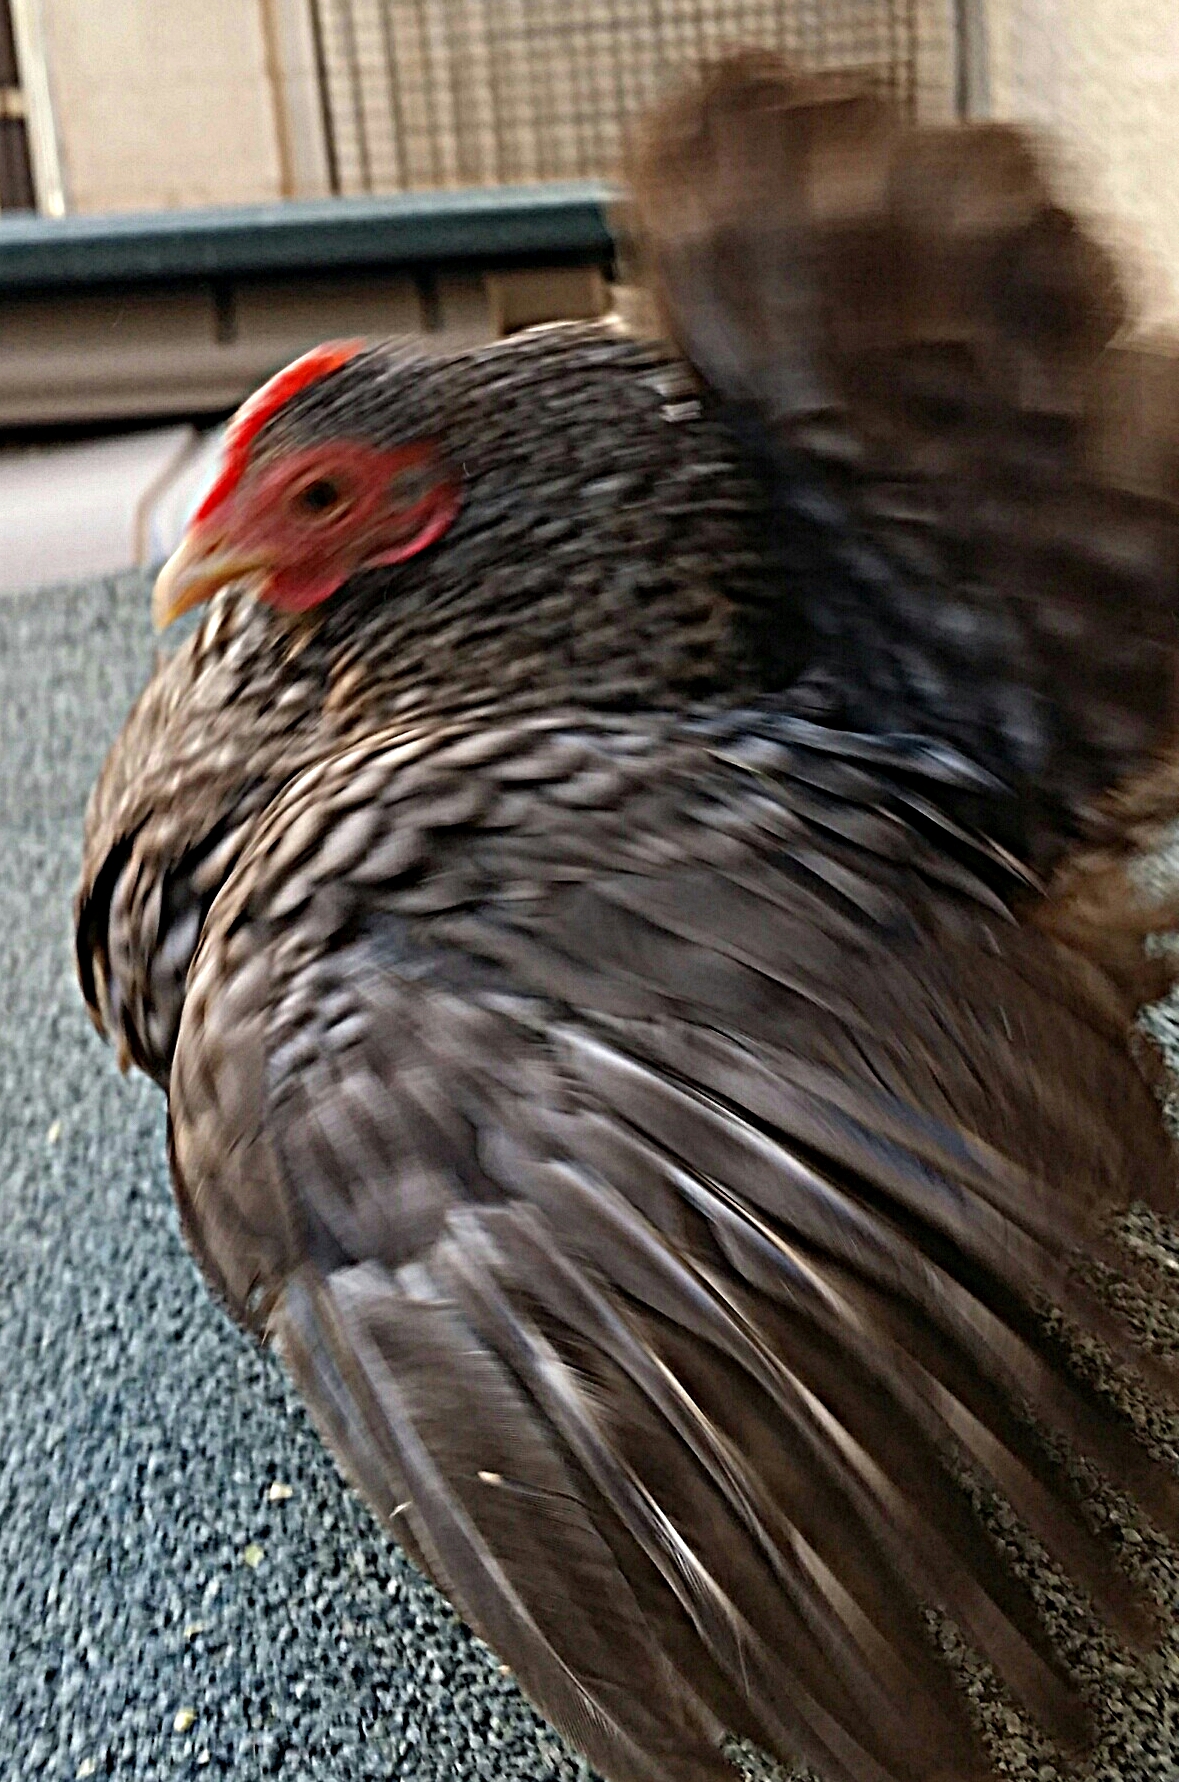 This hen is one of our foundation stock hens, she is the only foundation hen to remain in the breeder coup. She produced several breeders and a roo "Taco" that sired several of our lines chicks. She is getting some age on her, but produced several chicks late in the 2015 season.